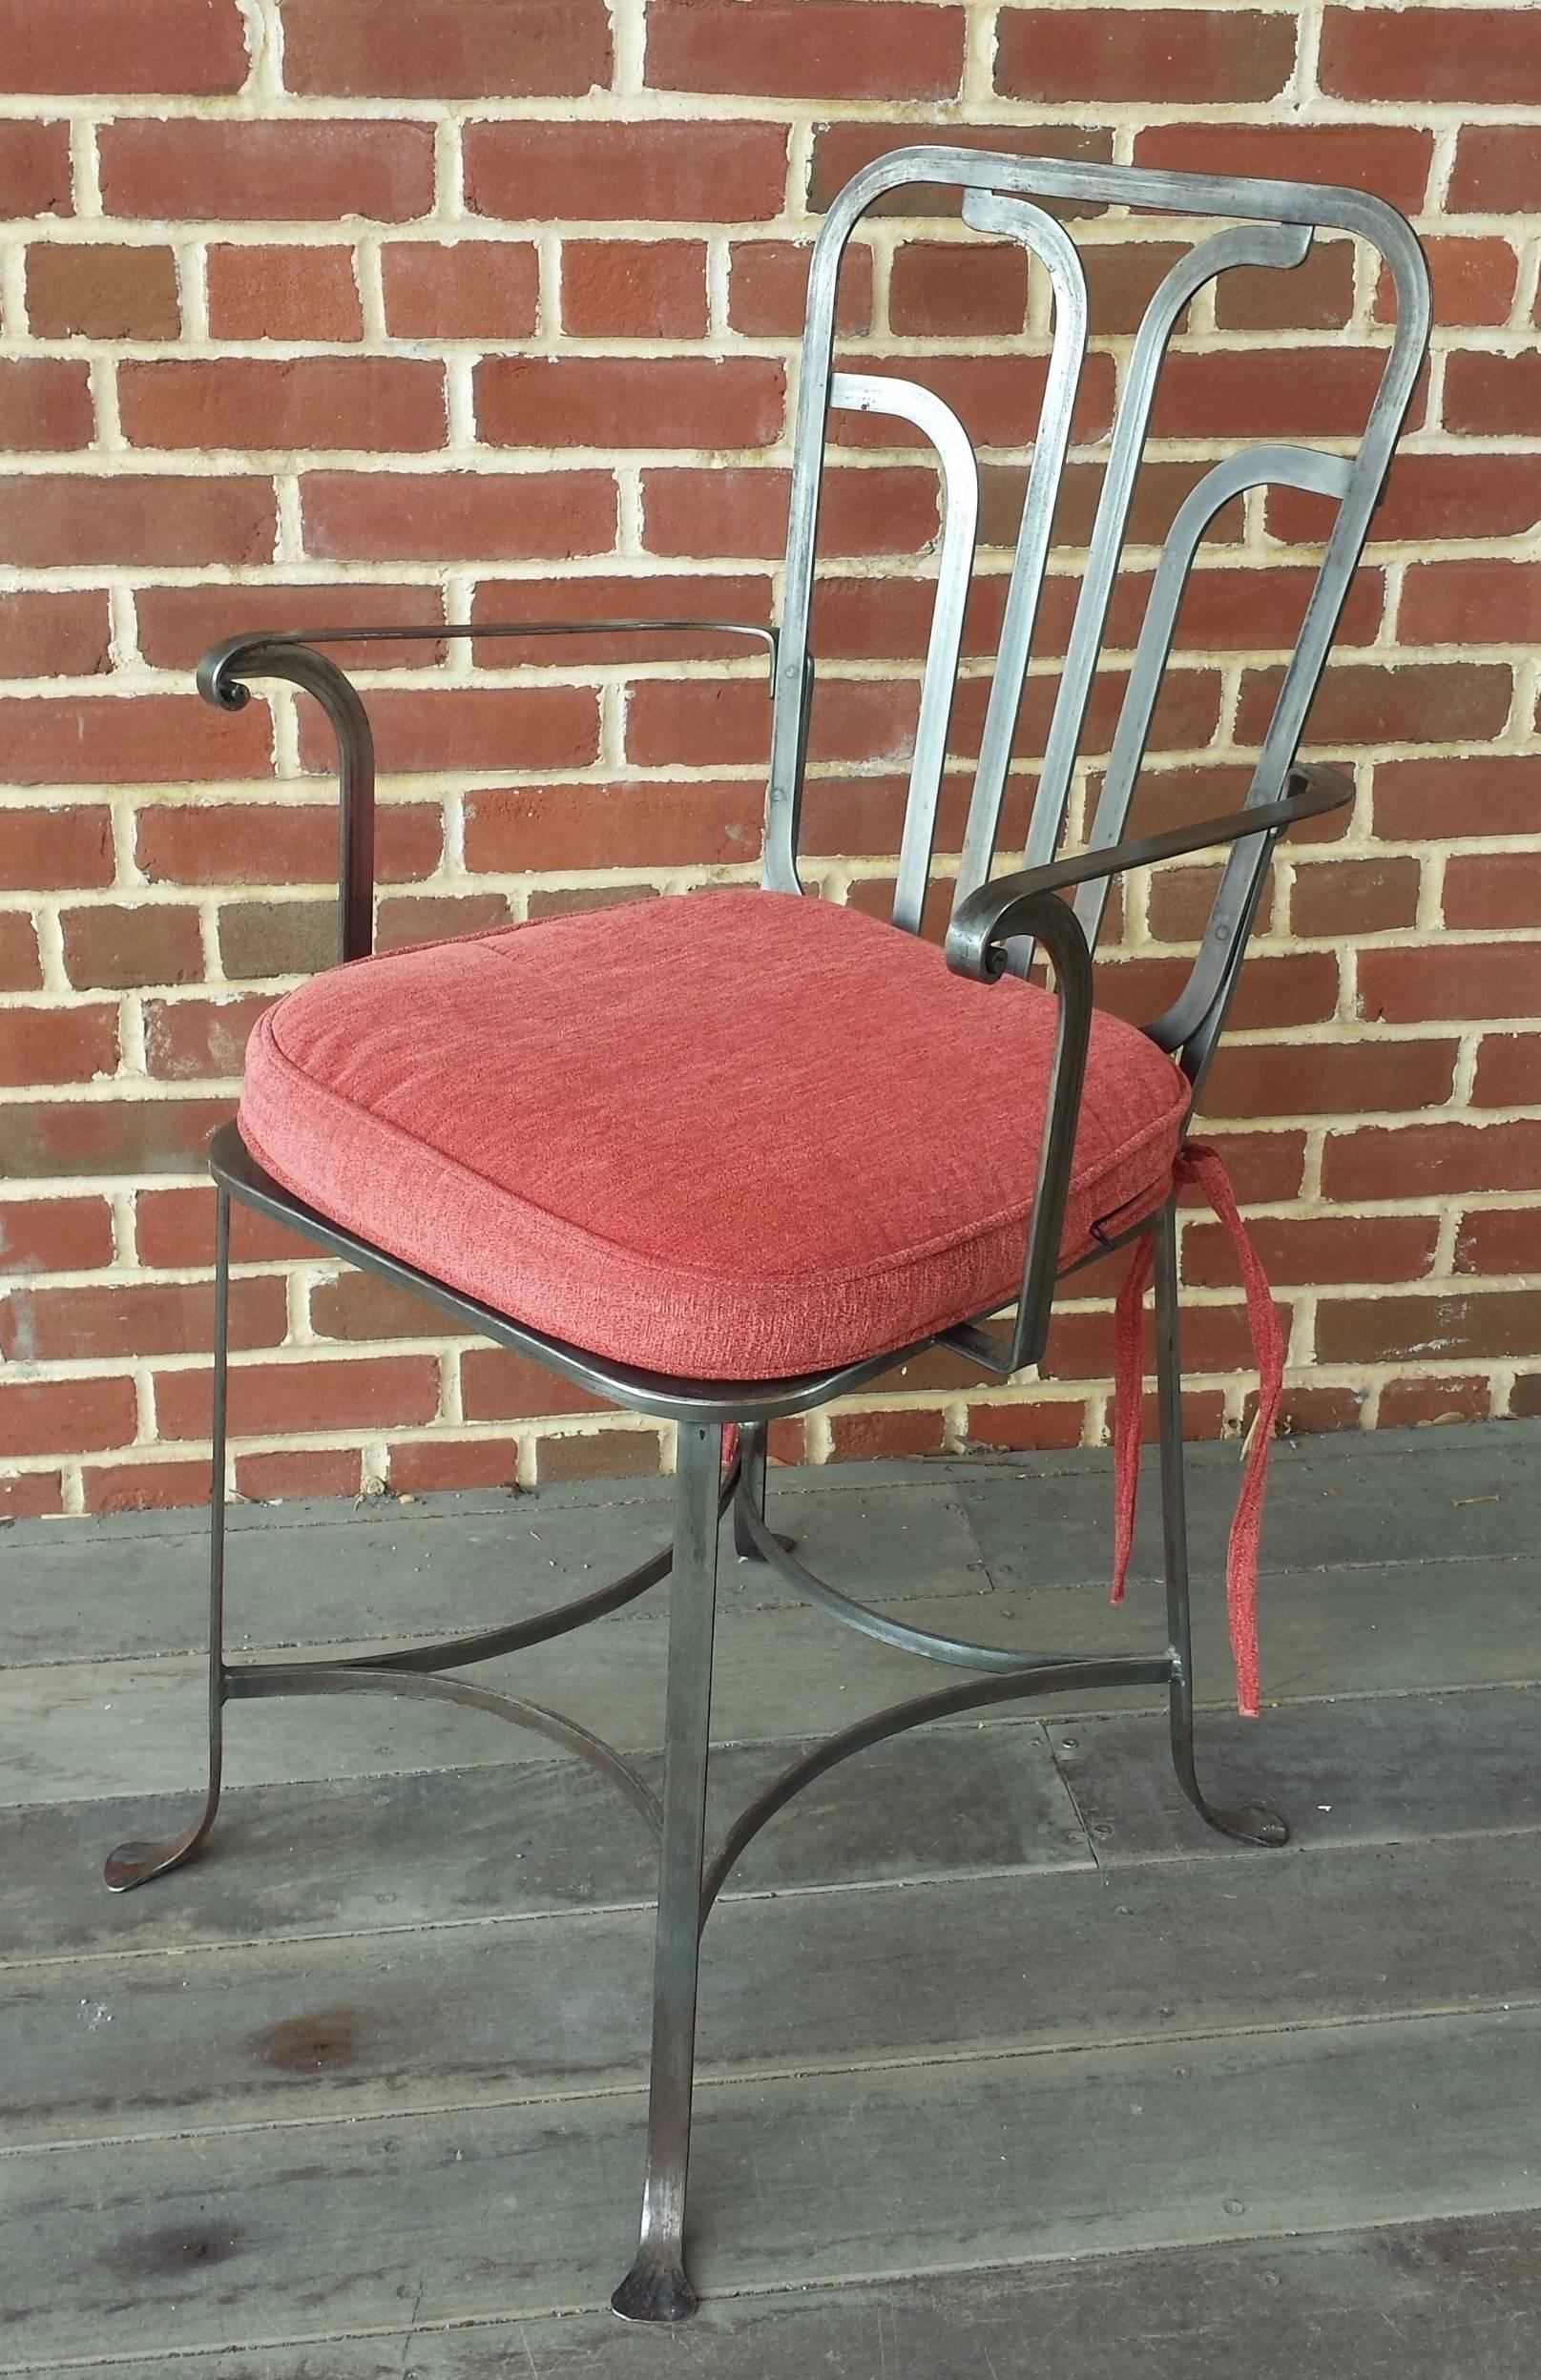 Set of six midcentury polished steel Italian armchairs. Good proportions with finely sculpted arms over woven seats and curved stretchers. Comfortable, sturdy and great for your covered outdoor dining space. Cushions included.
Italy, circa